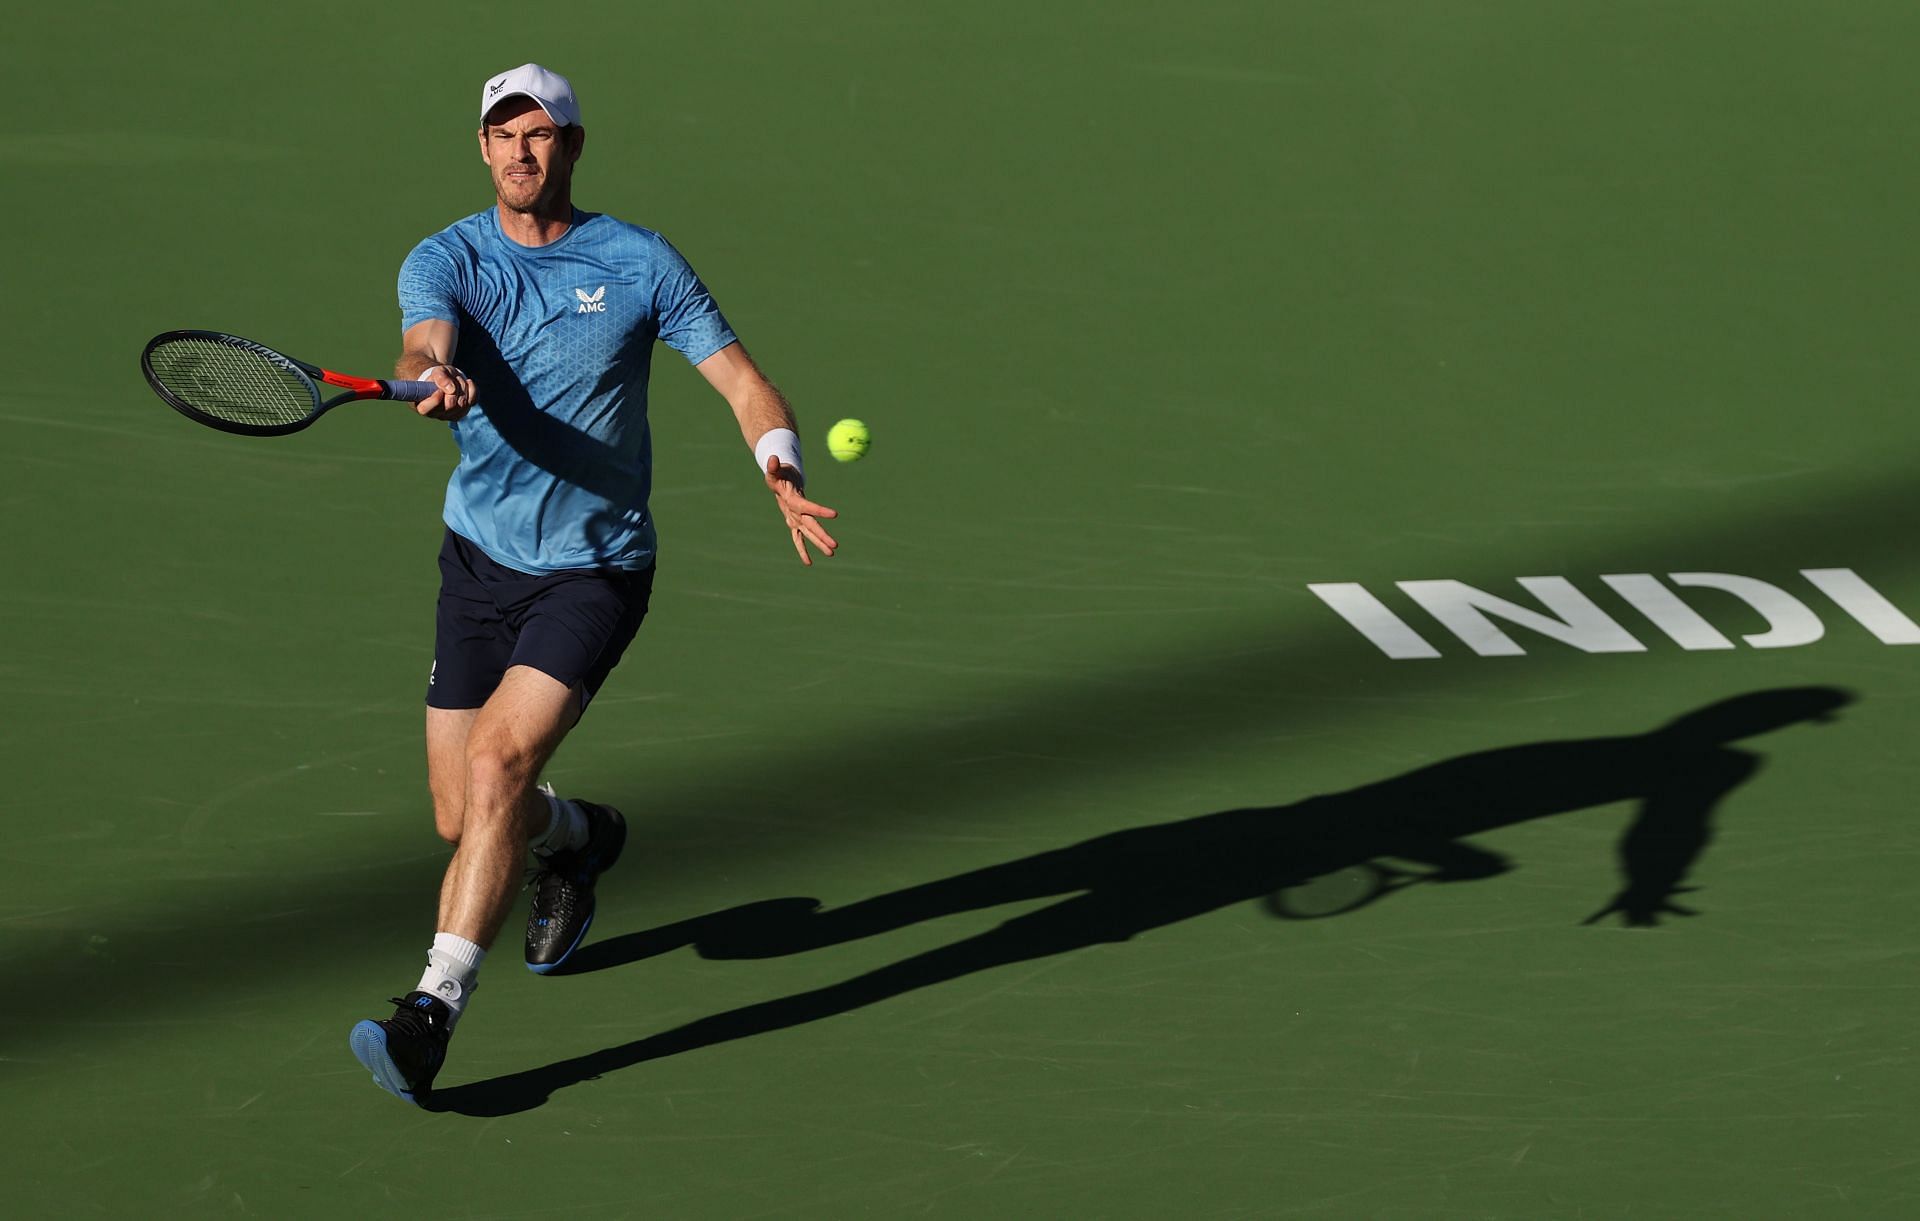 Andy Murray at the BNP Paribas Open - Day 9